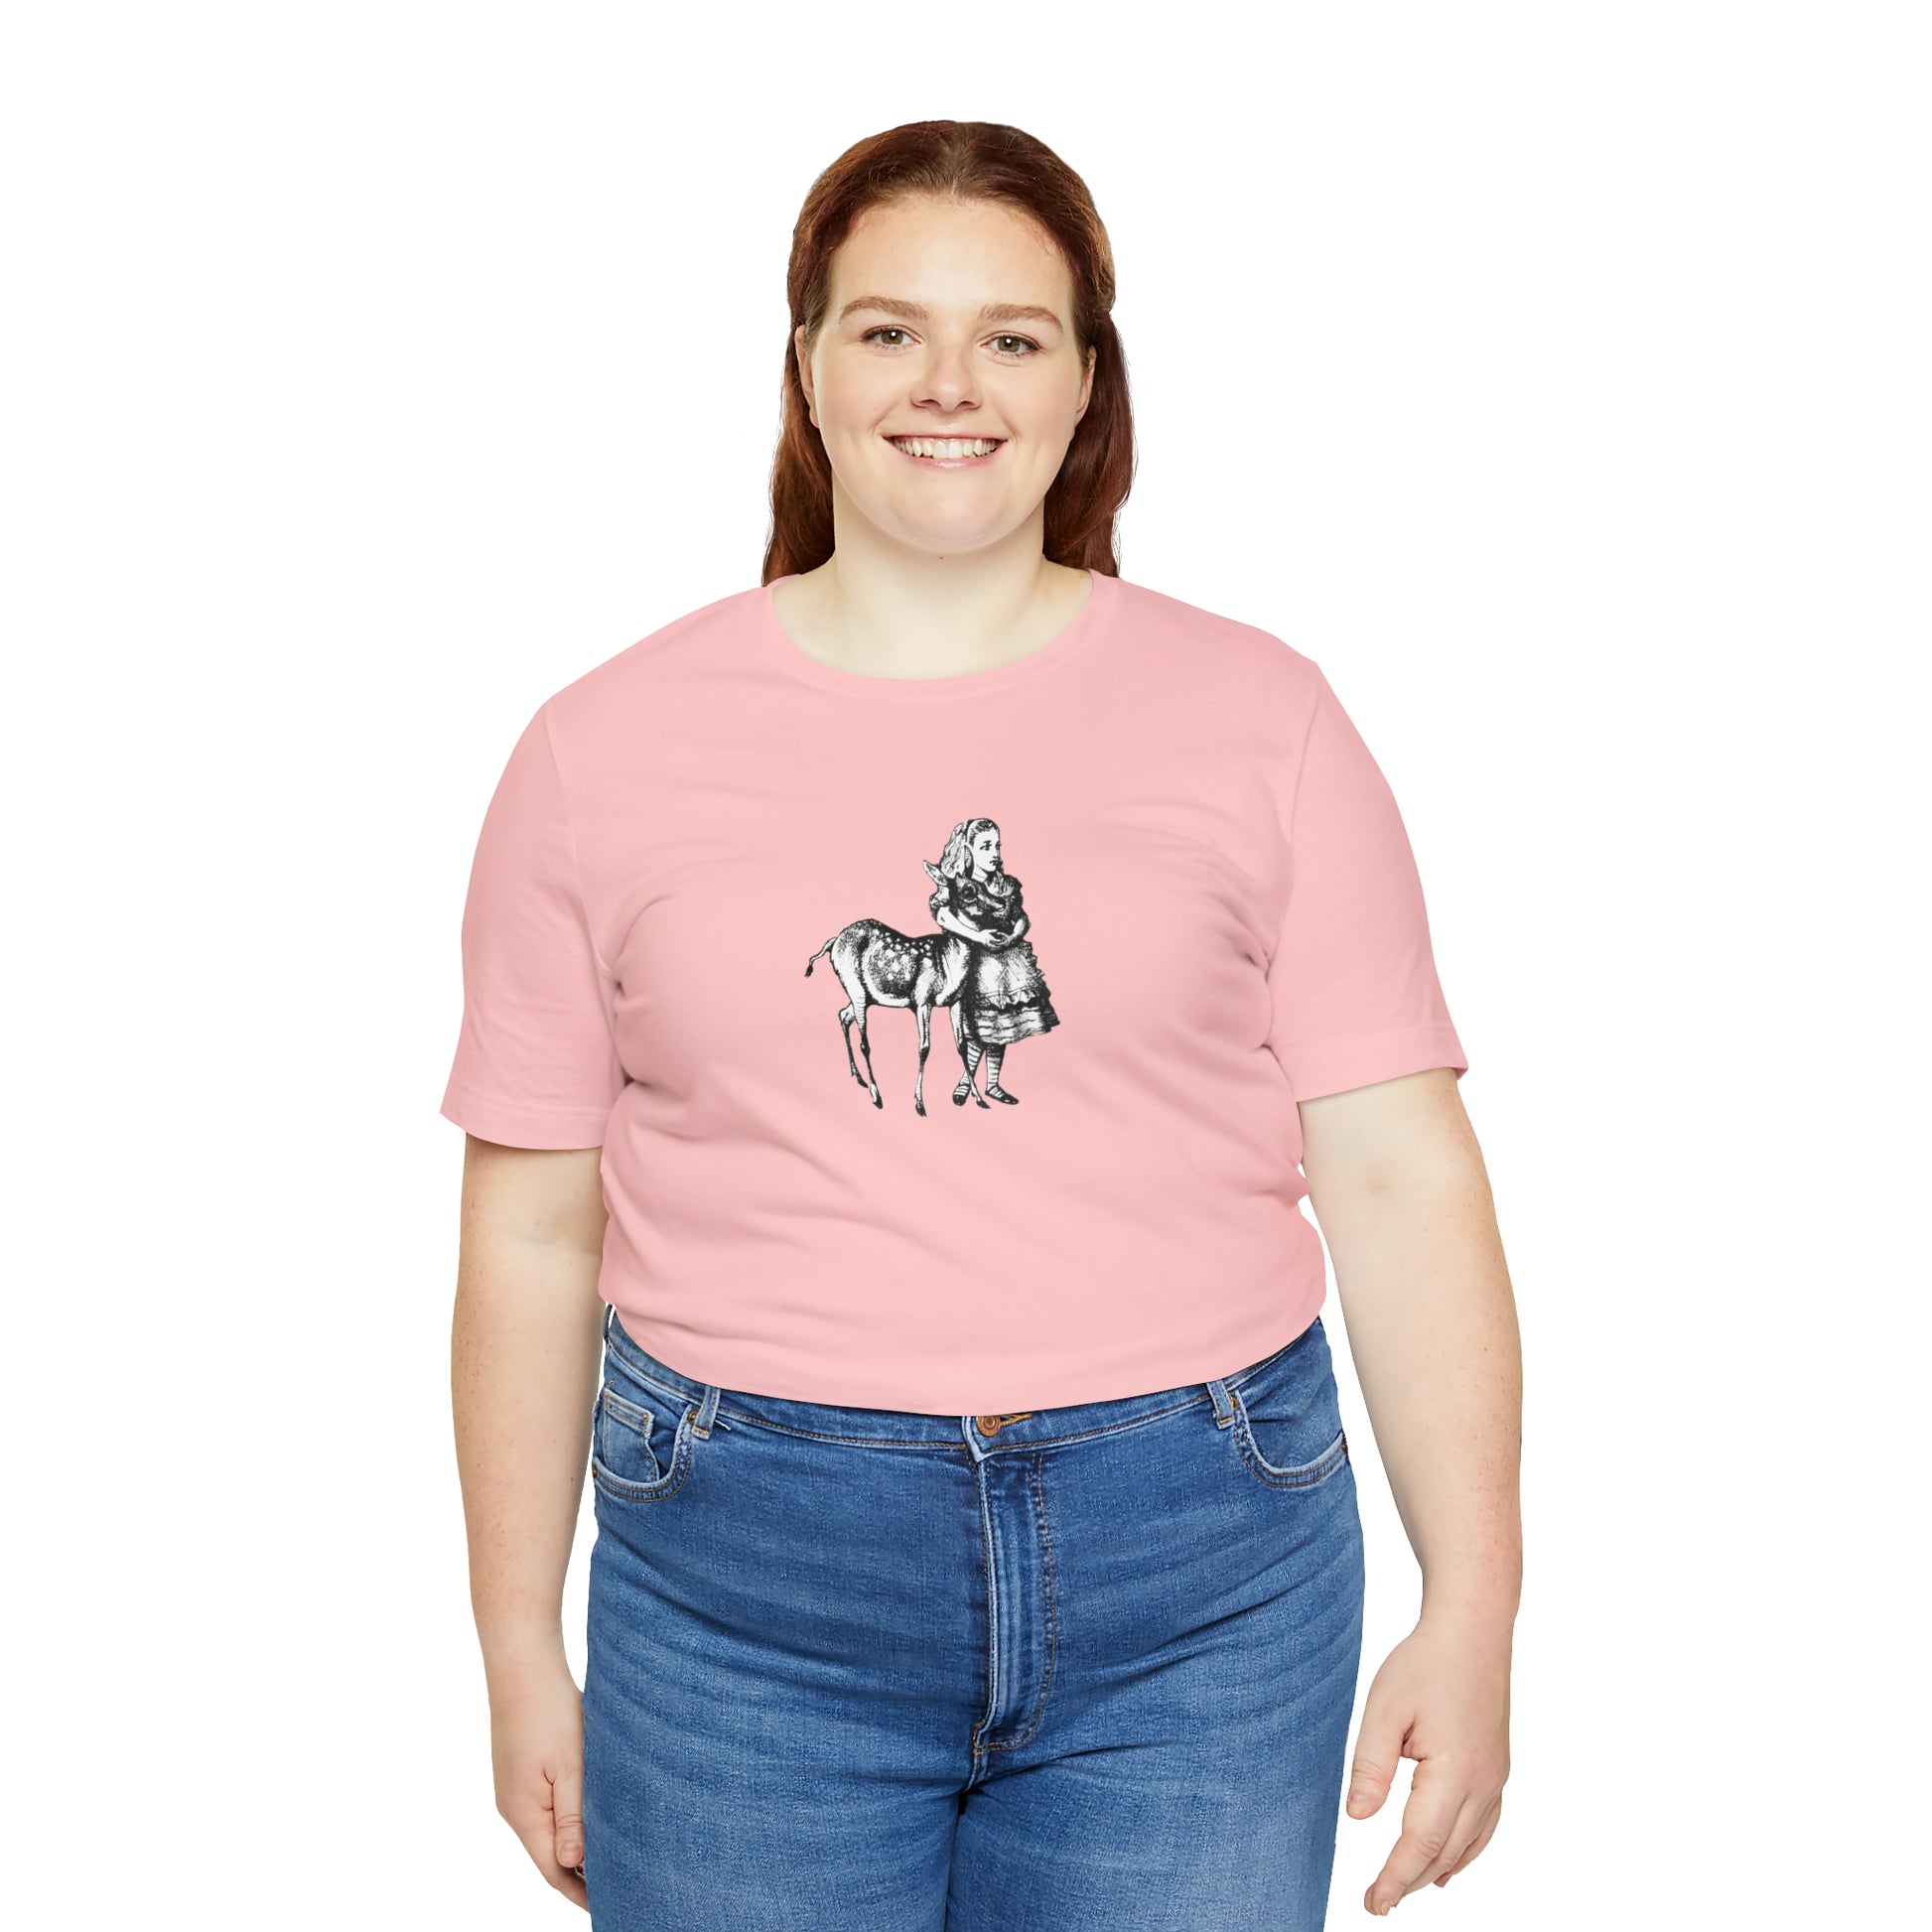 A smiling plus sized woman wearing a pink t-shirt with an illustration of Alice in Wonderland and a baby deer printed in black.